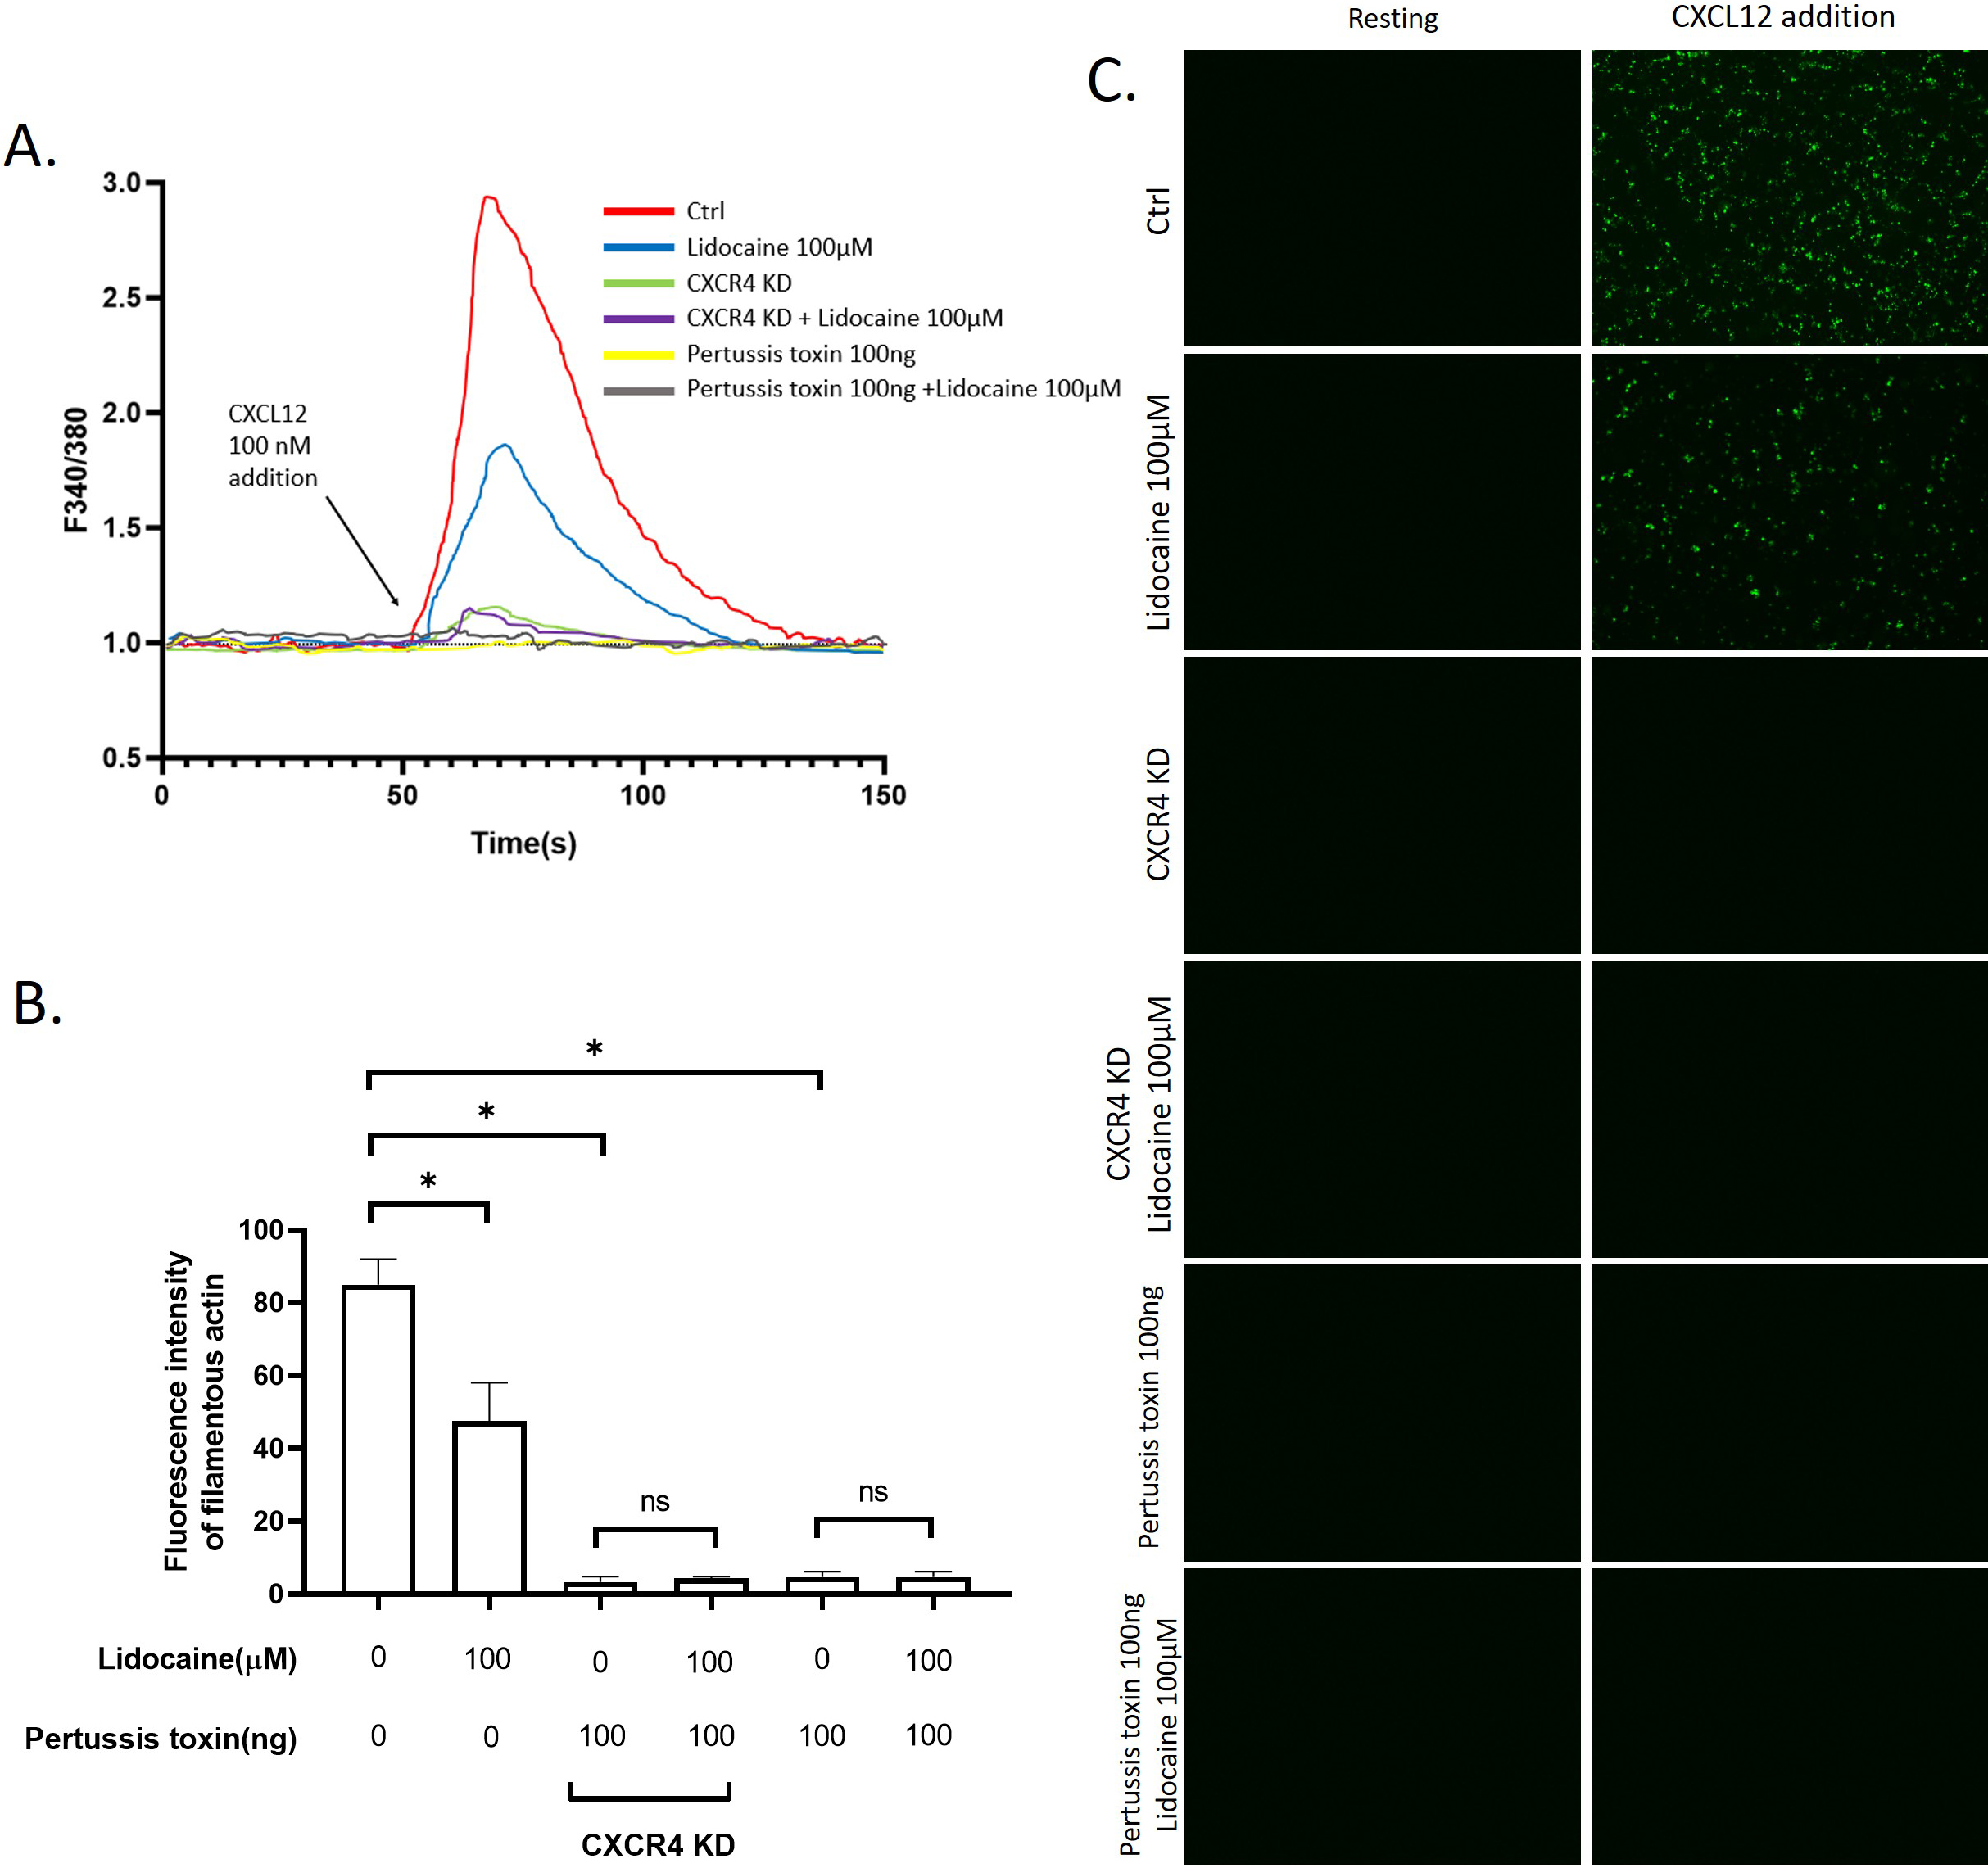 Effect of lidocaine on CXCL12-induced intracellular Ca2+ releasing and cytoskeleton remodeling. A. Real-time monitoring of the intracellular Ca2+ concentration in response to CXCL12 addition in A549 or CXCR4-knocked down A549 cells pre-incubated with testing reagents for 2 hours. B. Fluorescence intensity of filamentous actin before and after the exposure of CXCL12. The data were displayed in the Relative Fluorescence Unit C. Representative images of fluorescence of filamentous actin. (Significant differences are indicated by p*< 0.01, NS = not significant).